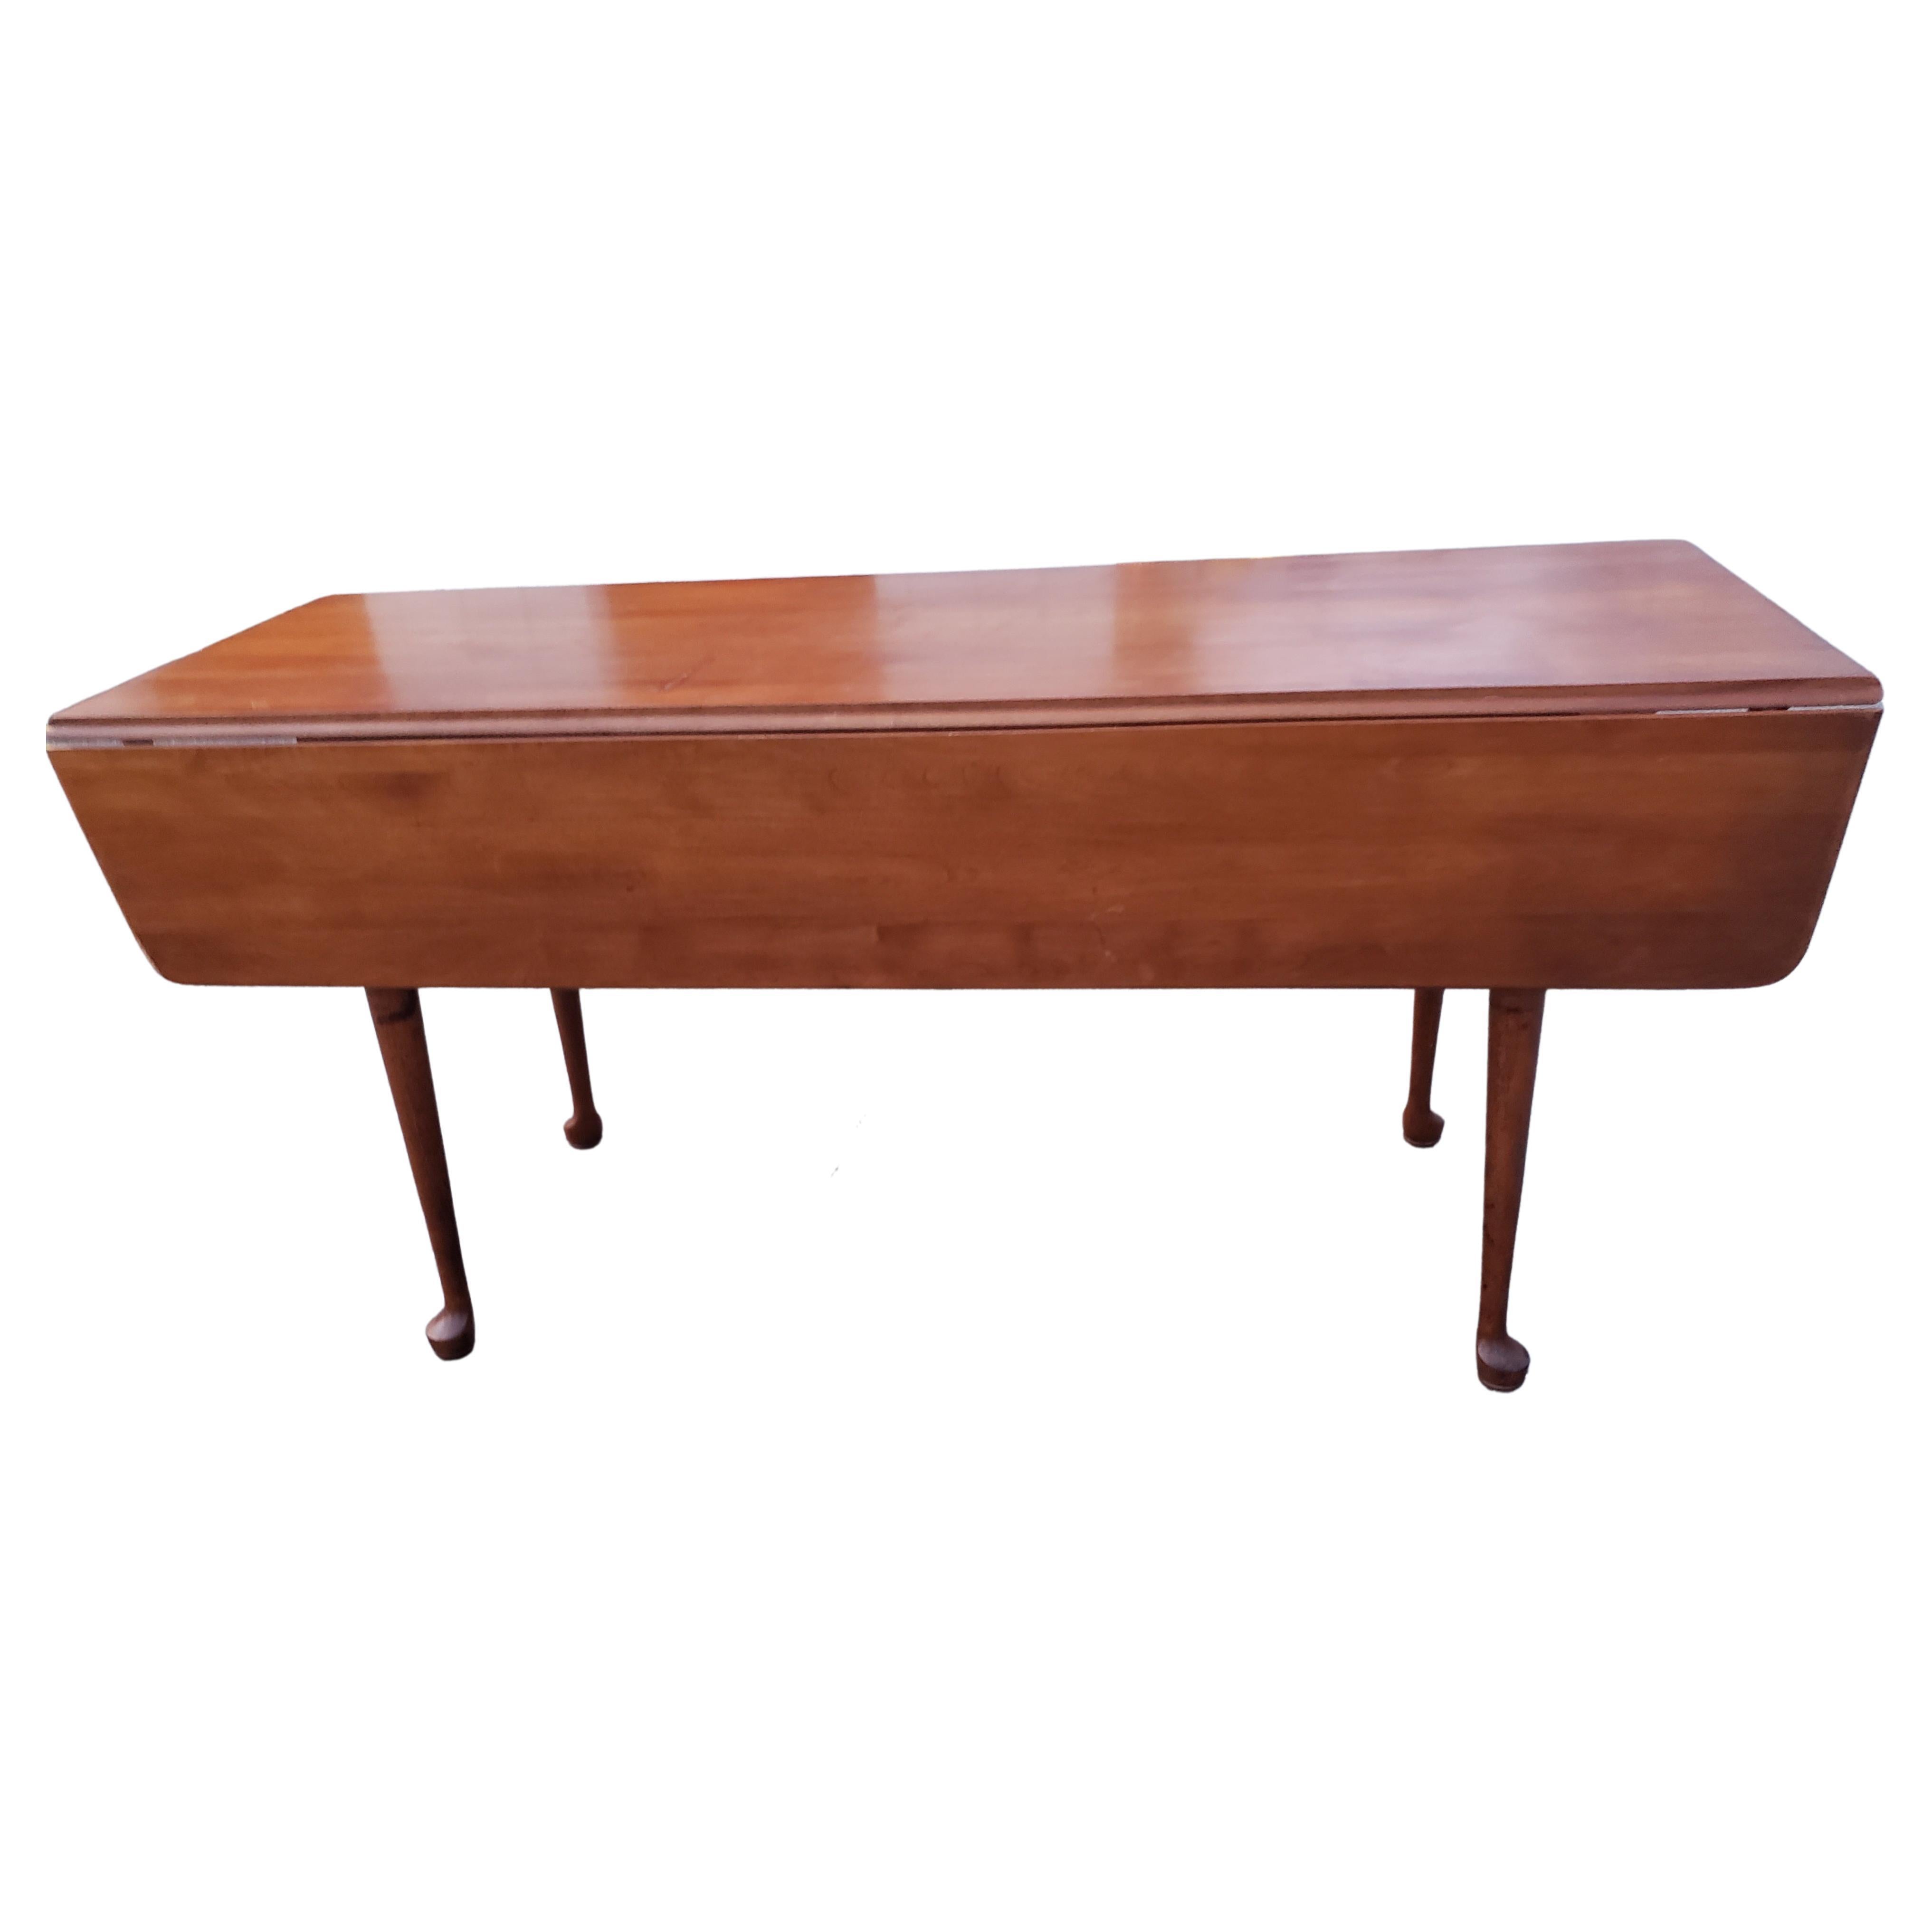 Mid-Century Modern American Rockport Maple Drop Leaf Cottage Dining Table, circa 1970s